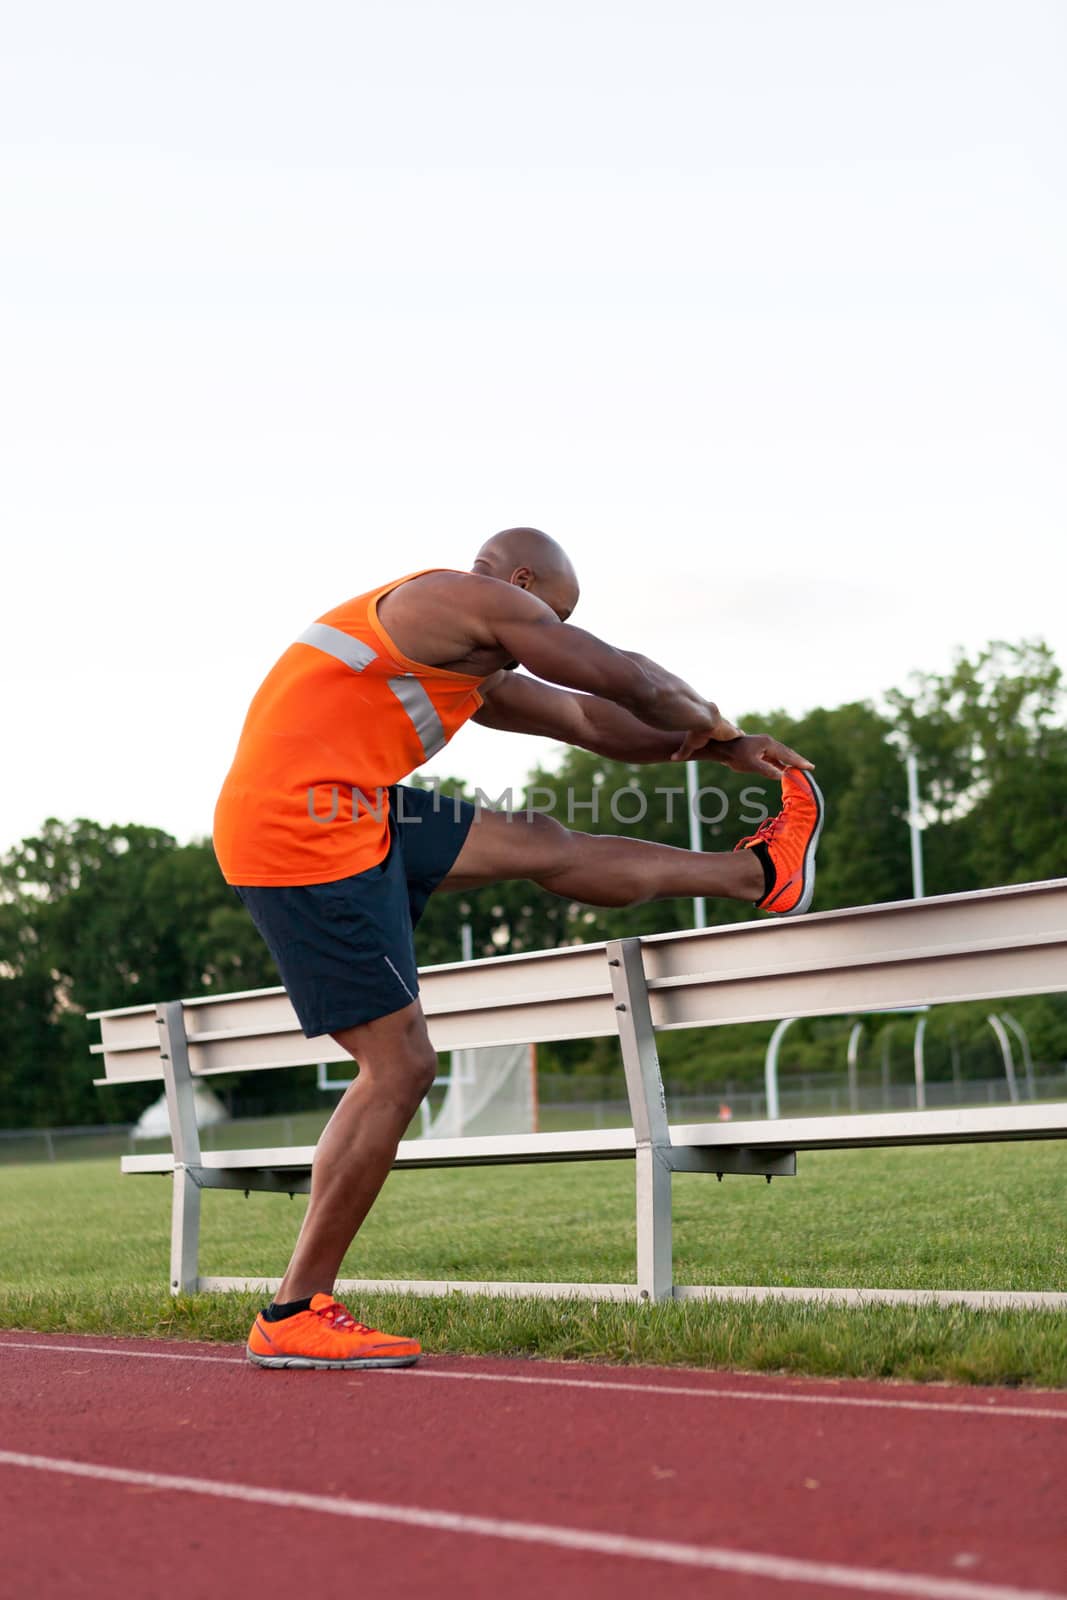 African American man in his 30s stretching at a sports track outdoors.